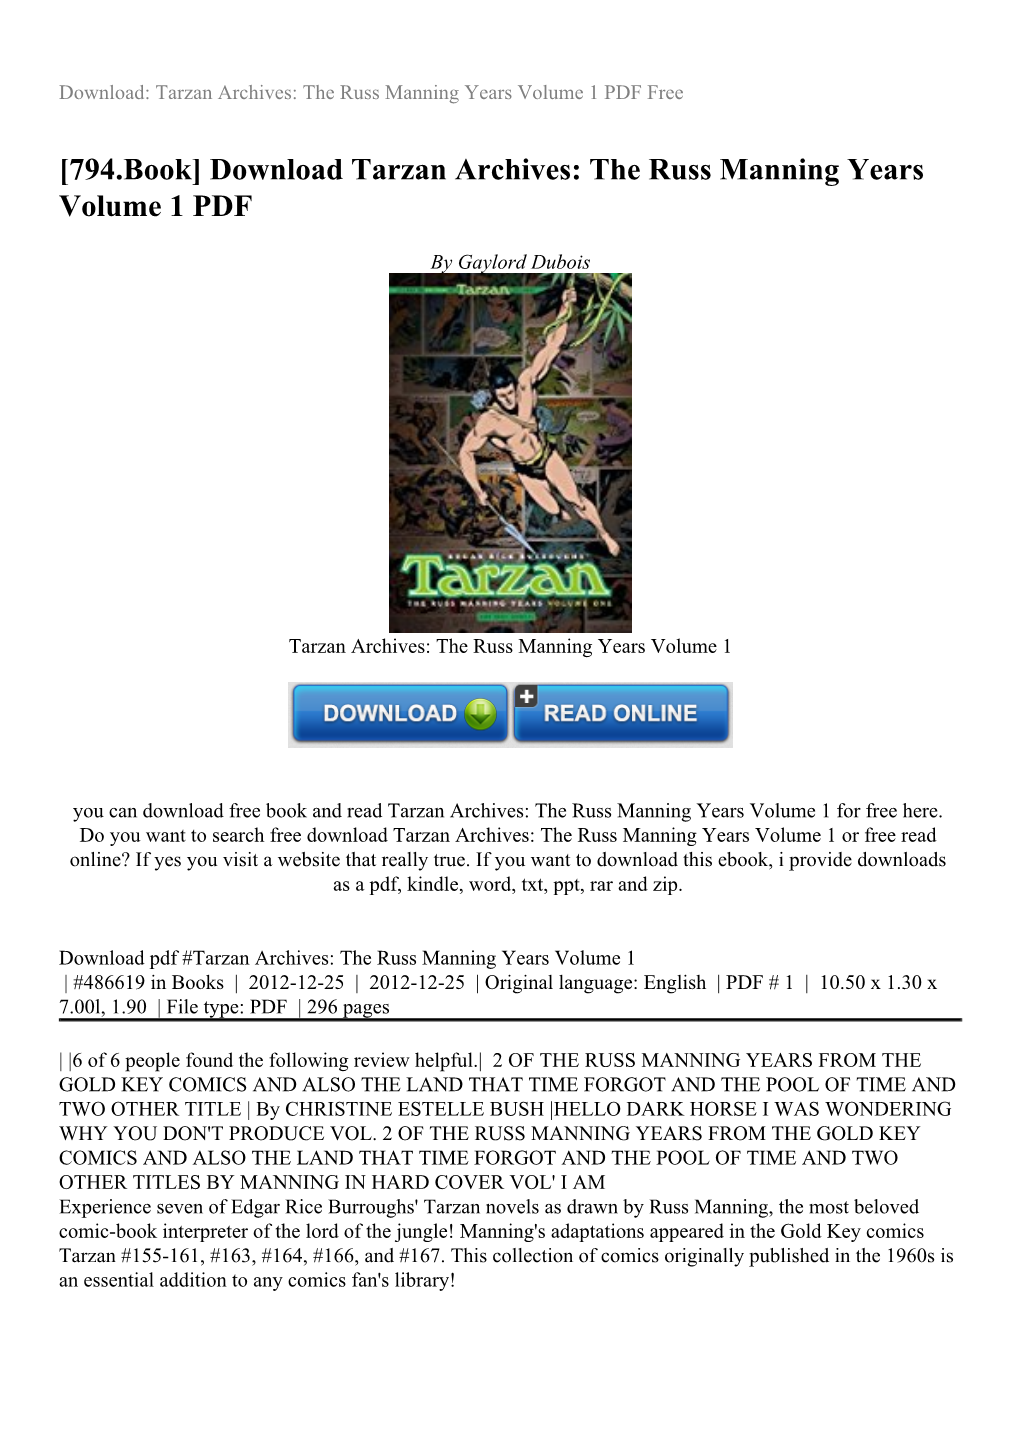 Download Tarzan Archives: the Russ Manning Years Volume 1 PDF